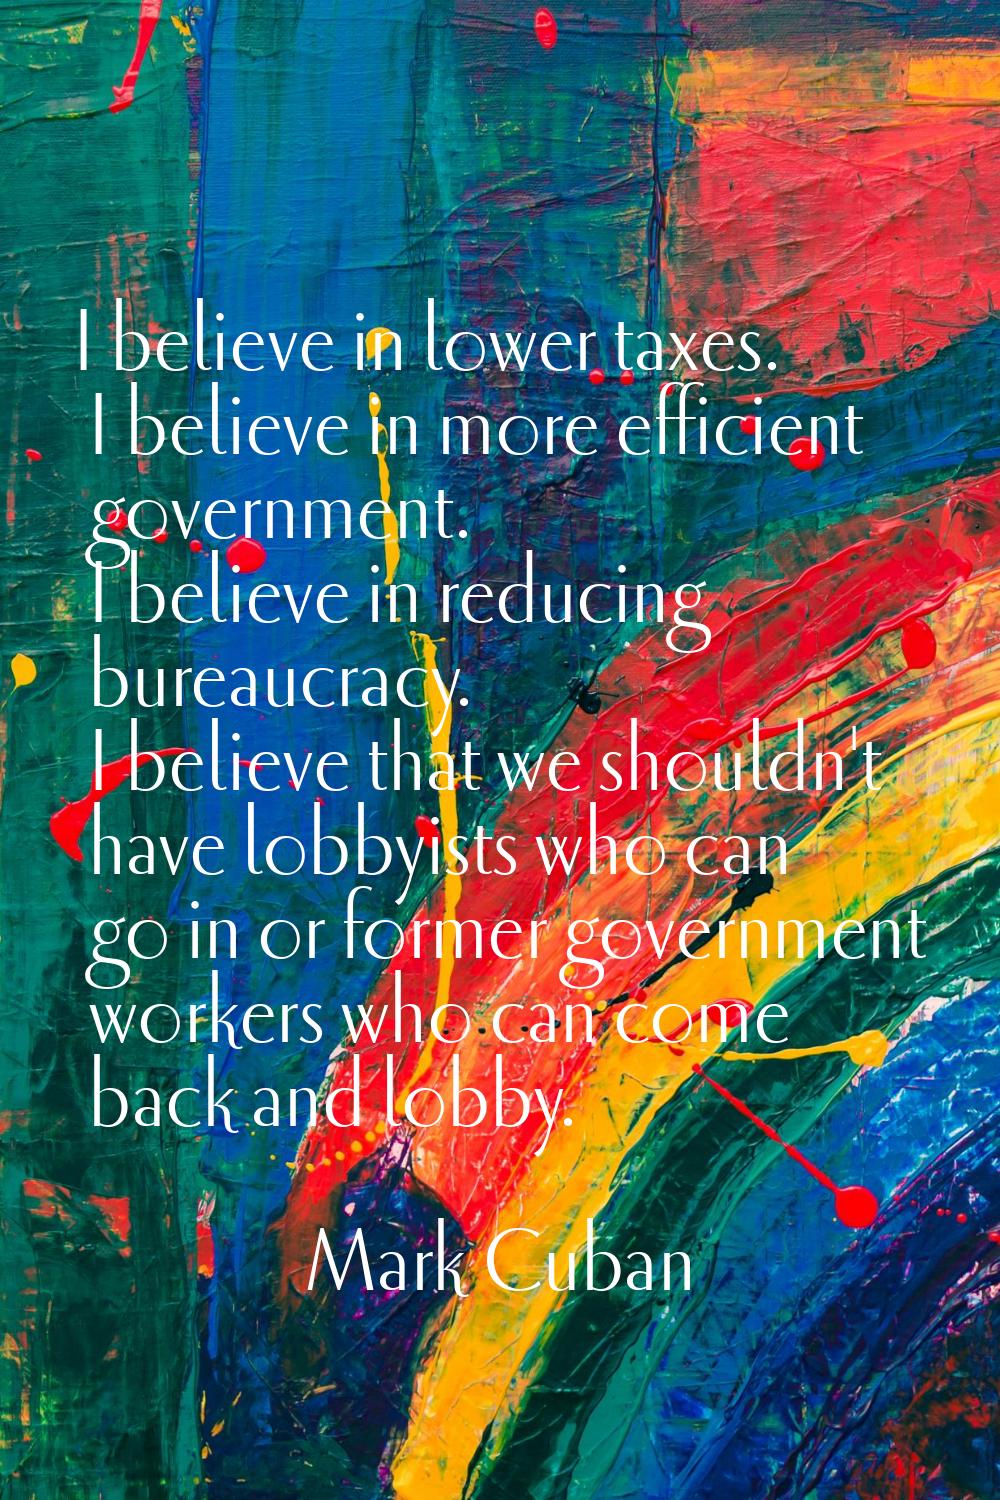 I believe in lower taxes. I believe in more efficient government. I believe in reducing bureaucracy